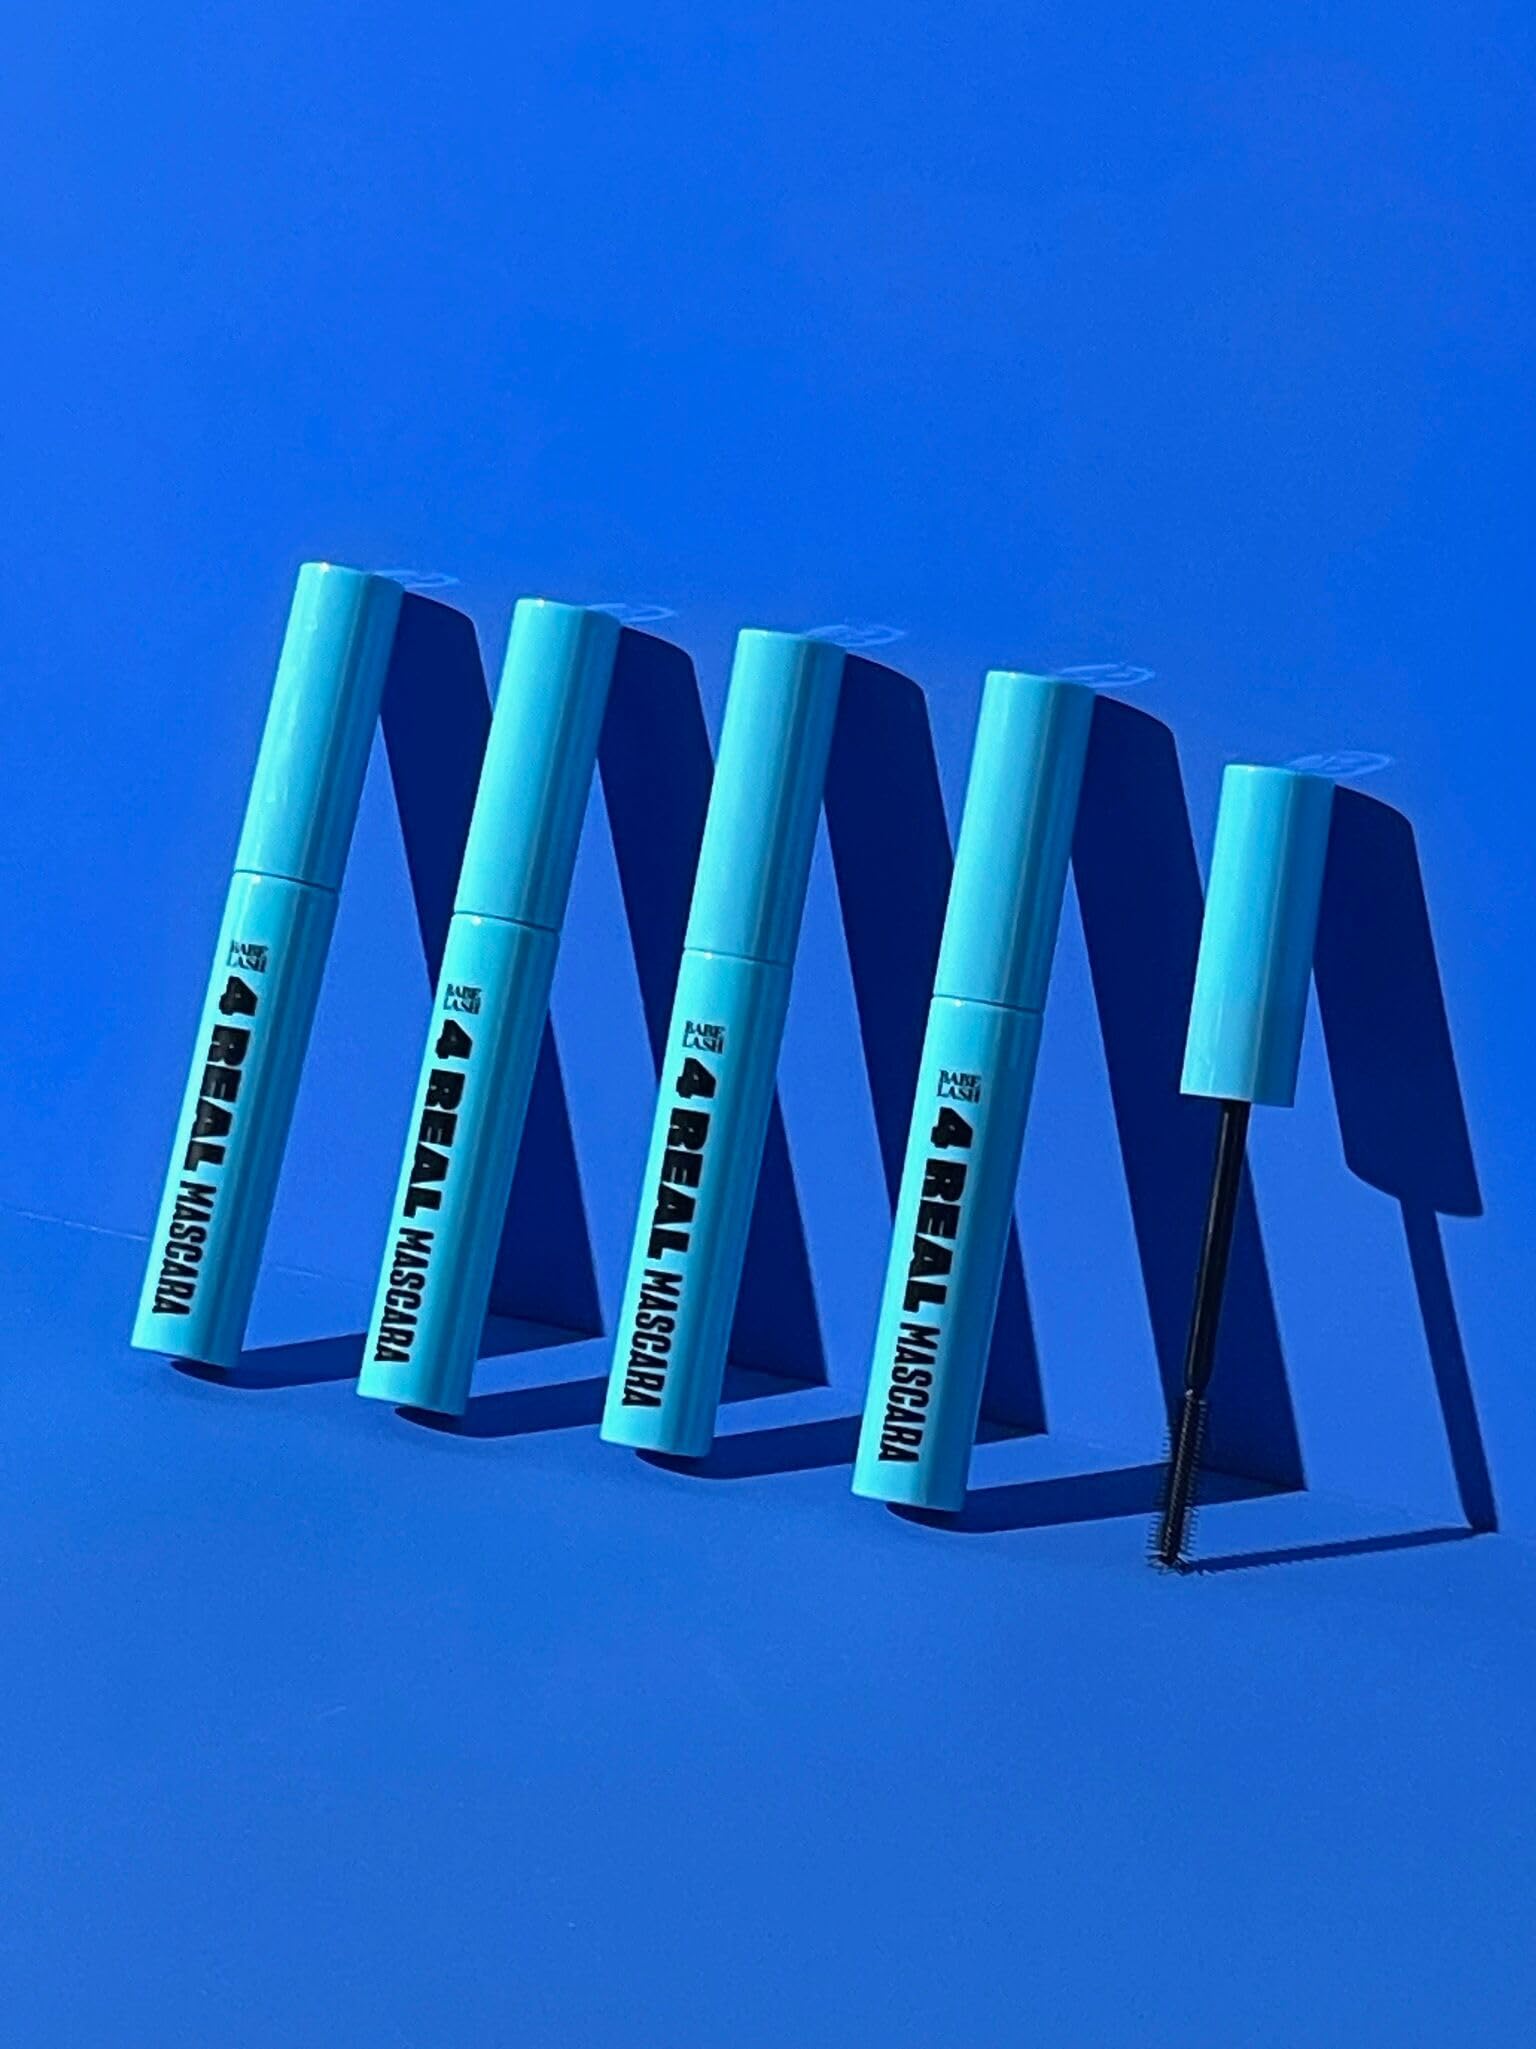 Babe Original 4 Real Mascara Black for Volume, Length, and Lift in Eyelashes, Defined & Flutterly Look, Vegan & Cruelty-Free, 8.5g